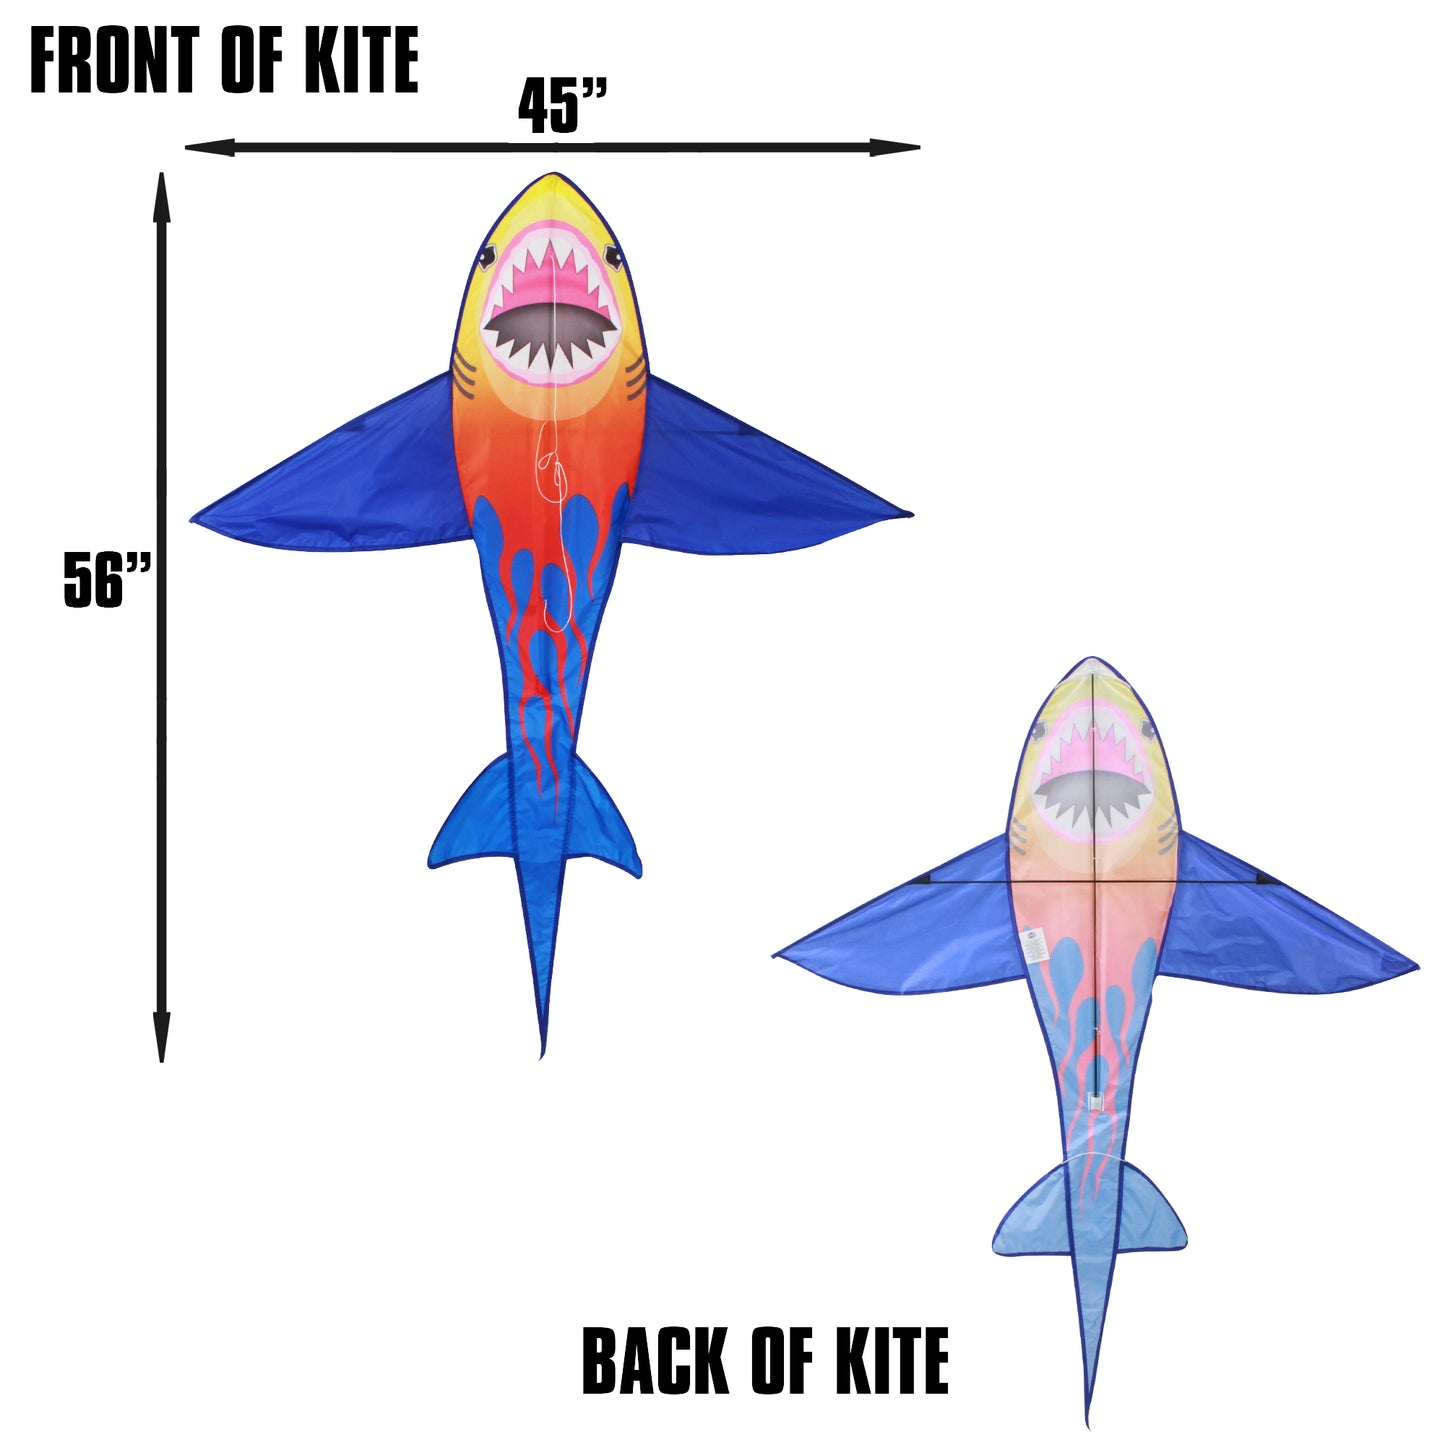 X Kites StratoKite Shark Nylon Figure Kite Product Dimensions 56 inches tall by 45 inches wide